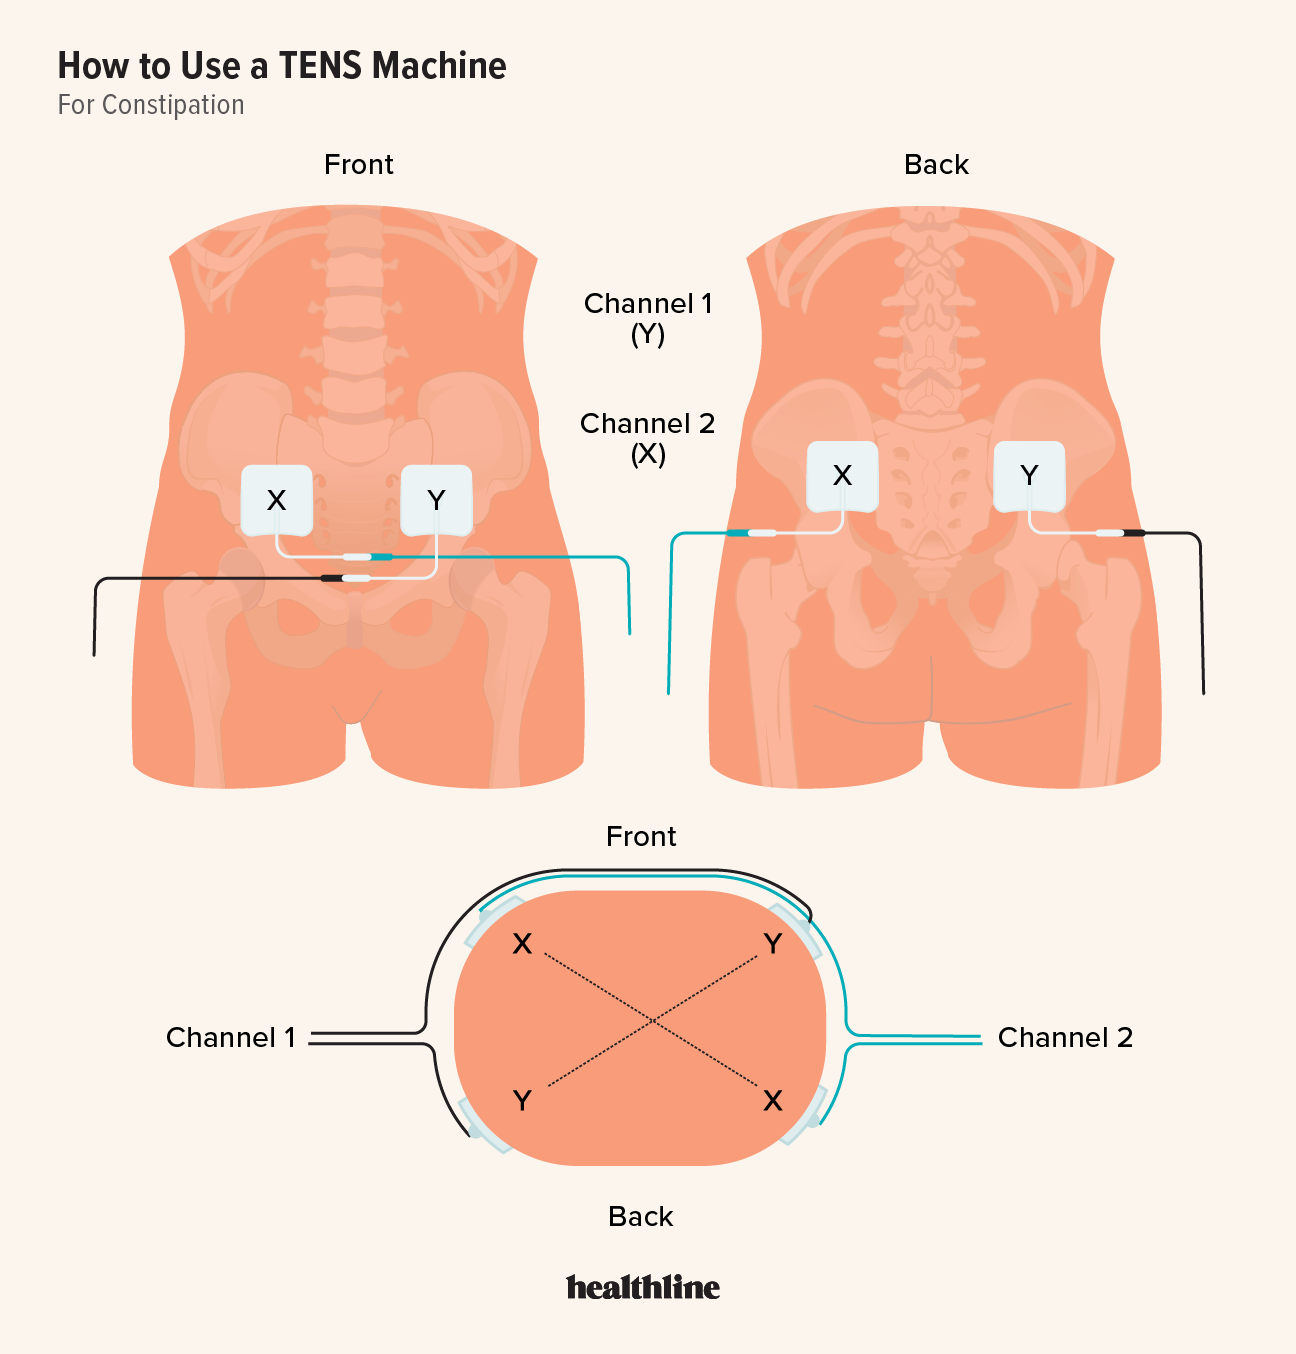 How to Use a TENS Unit